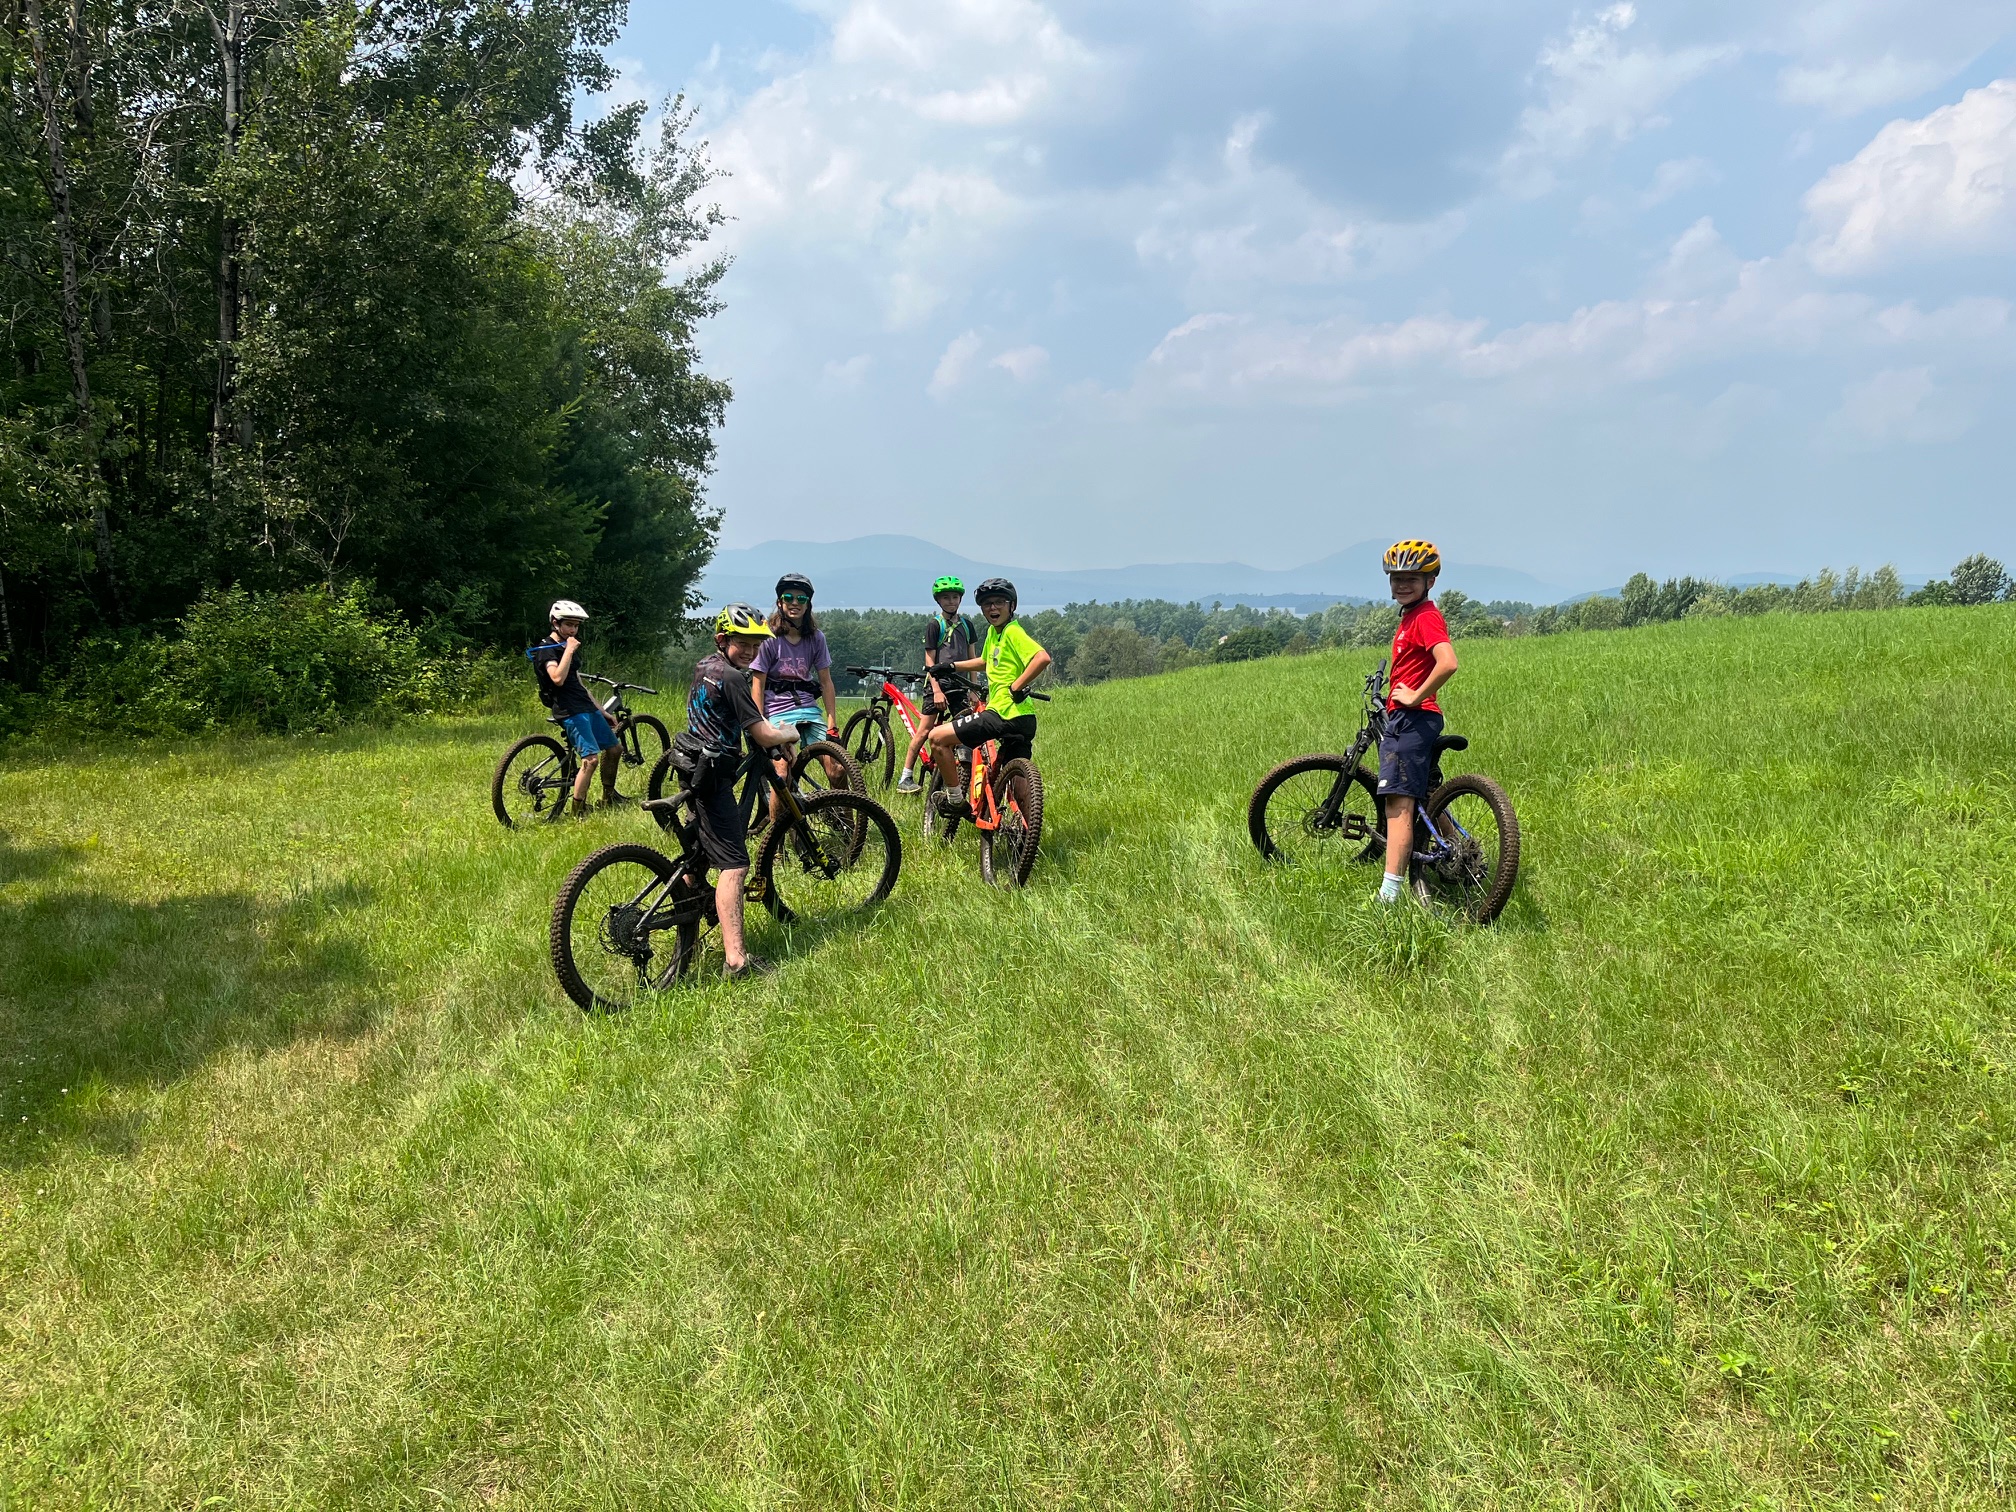 Mud City Adventures Mountain Bike Camp is an adventure filled 3-day 1-night excursion featuring introductory mountain biking and beginner lessons. Once you're comfortable on the beginner trails, we'll progress as much as the kids want to, within reason of course. 